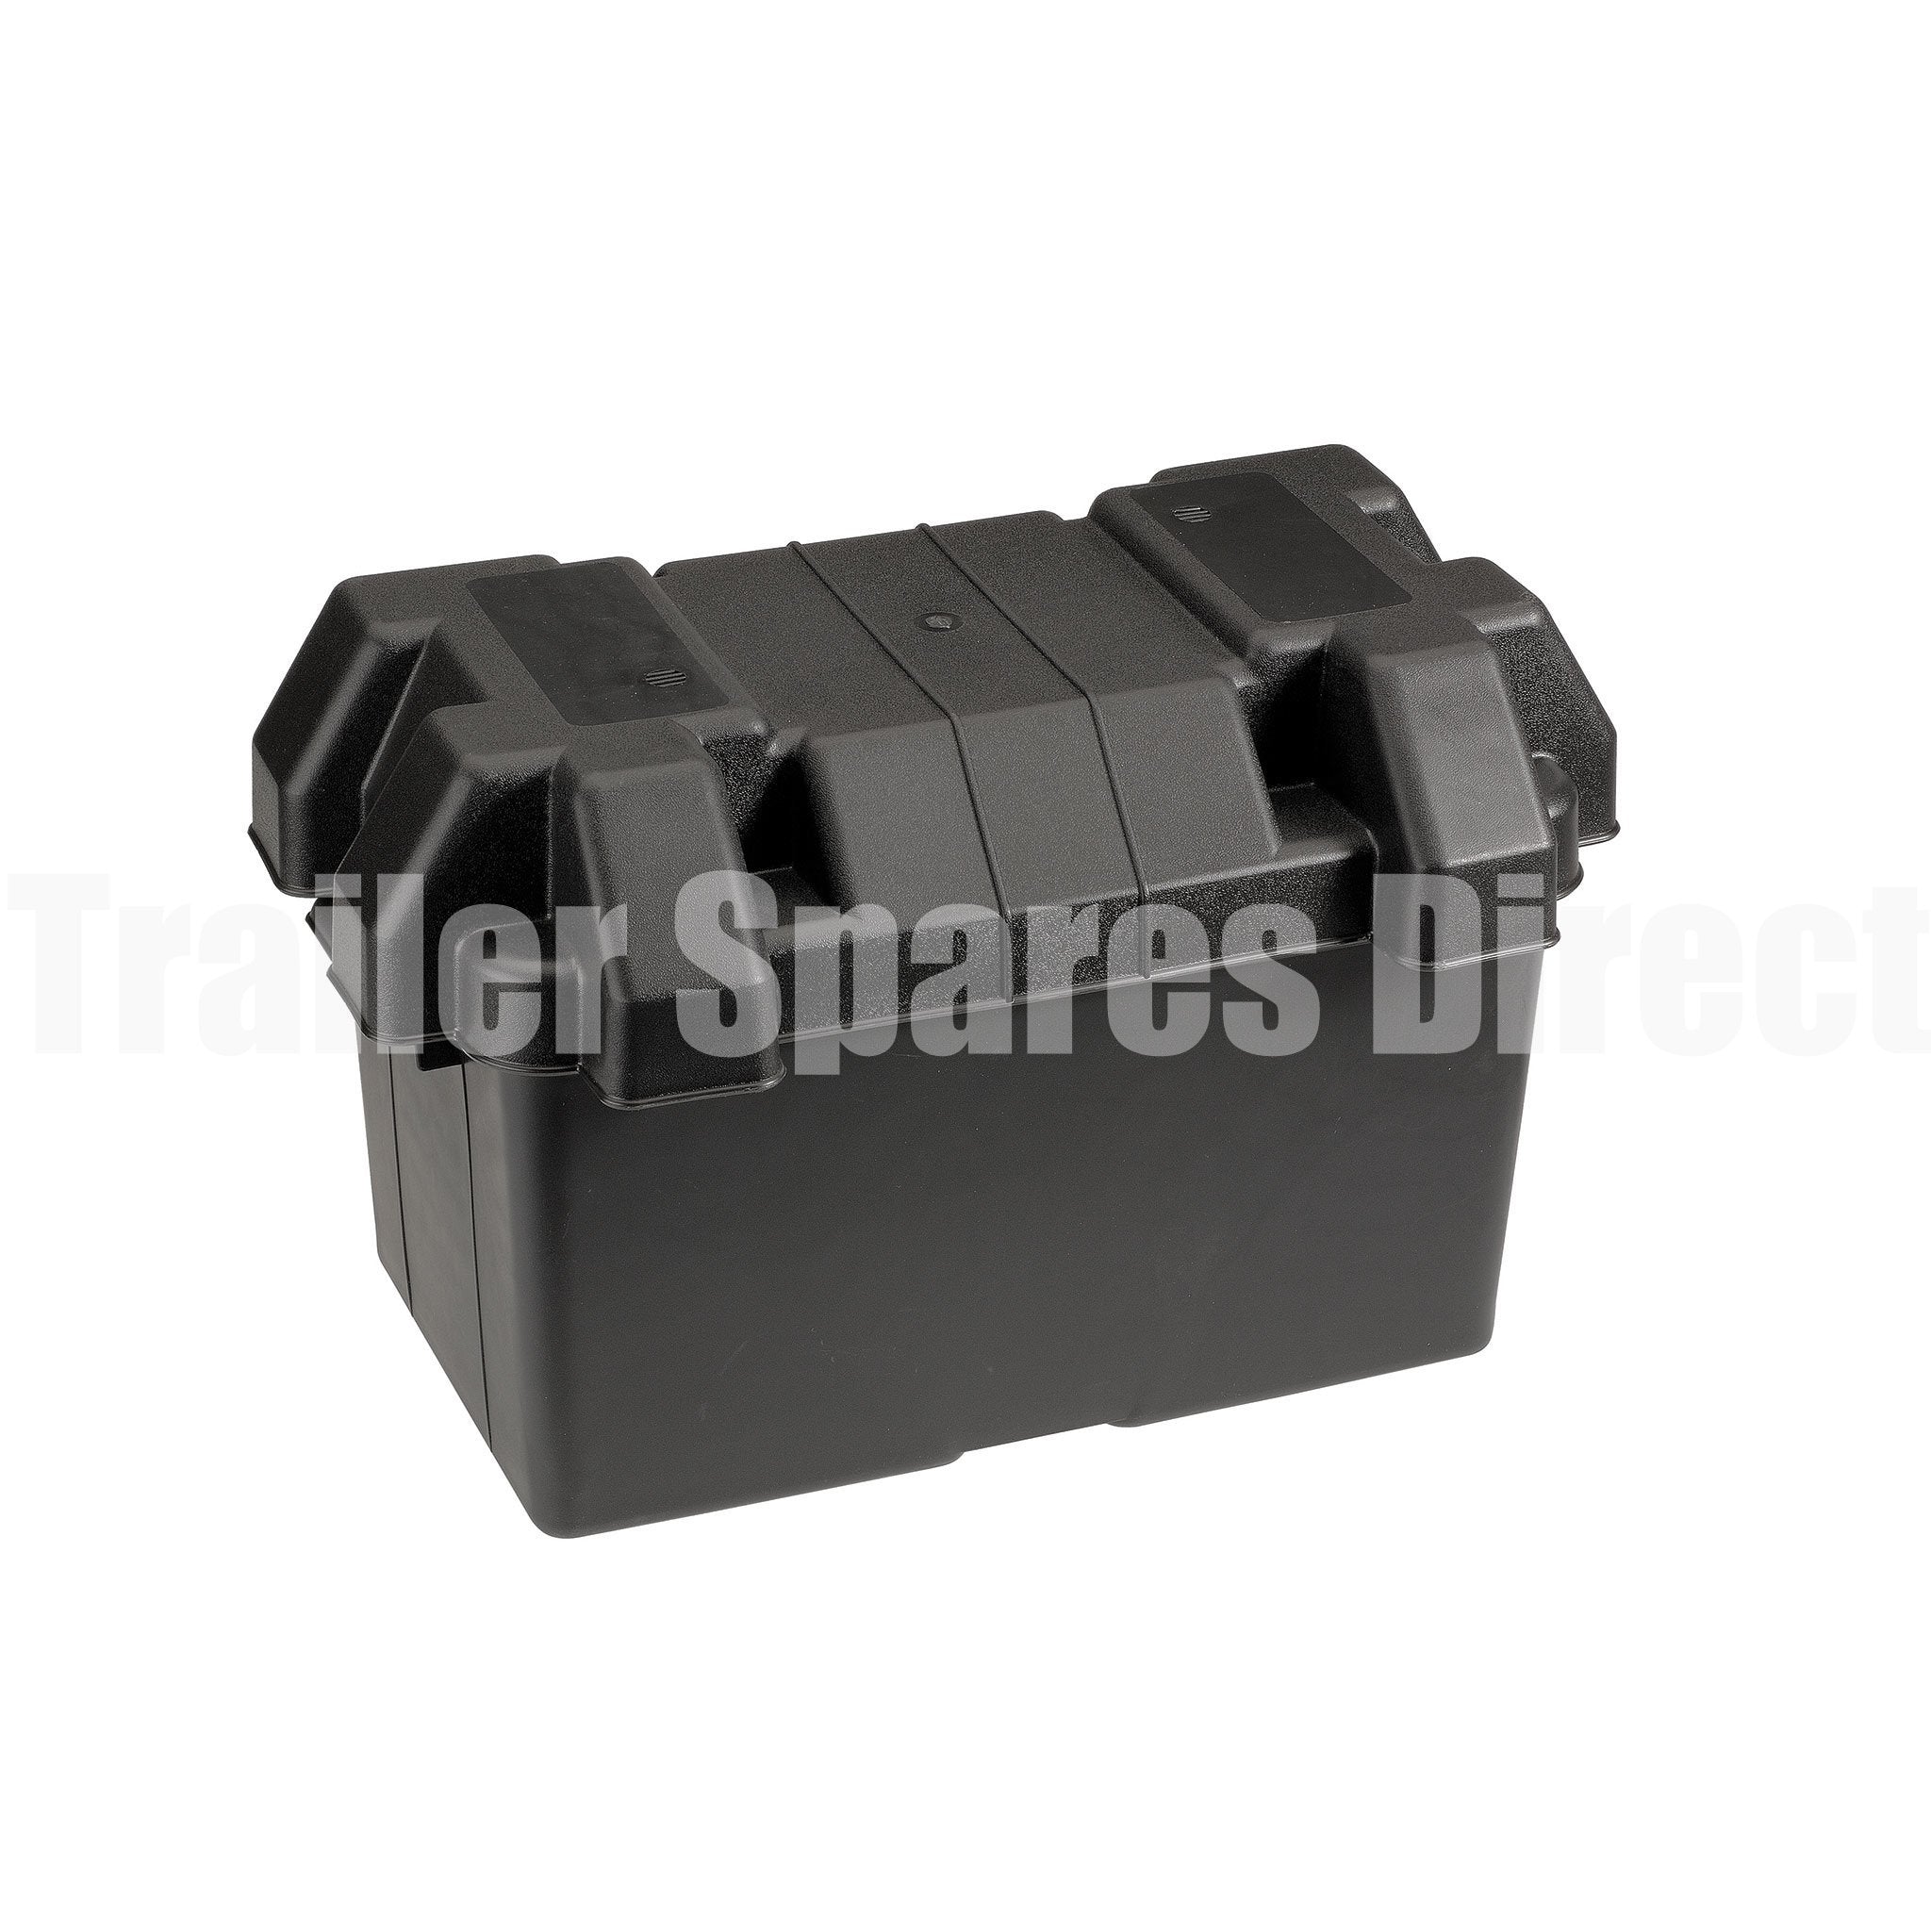 Large battery box to suit N70 size batteries